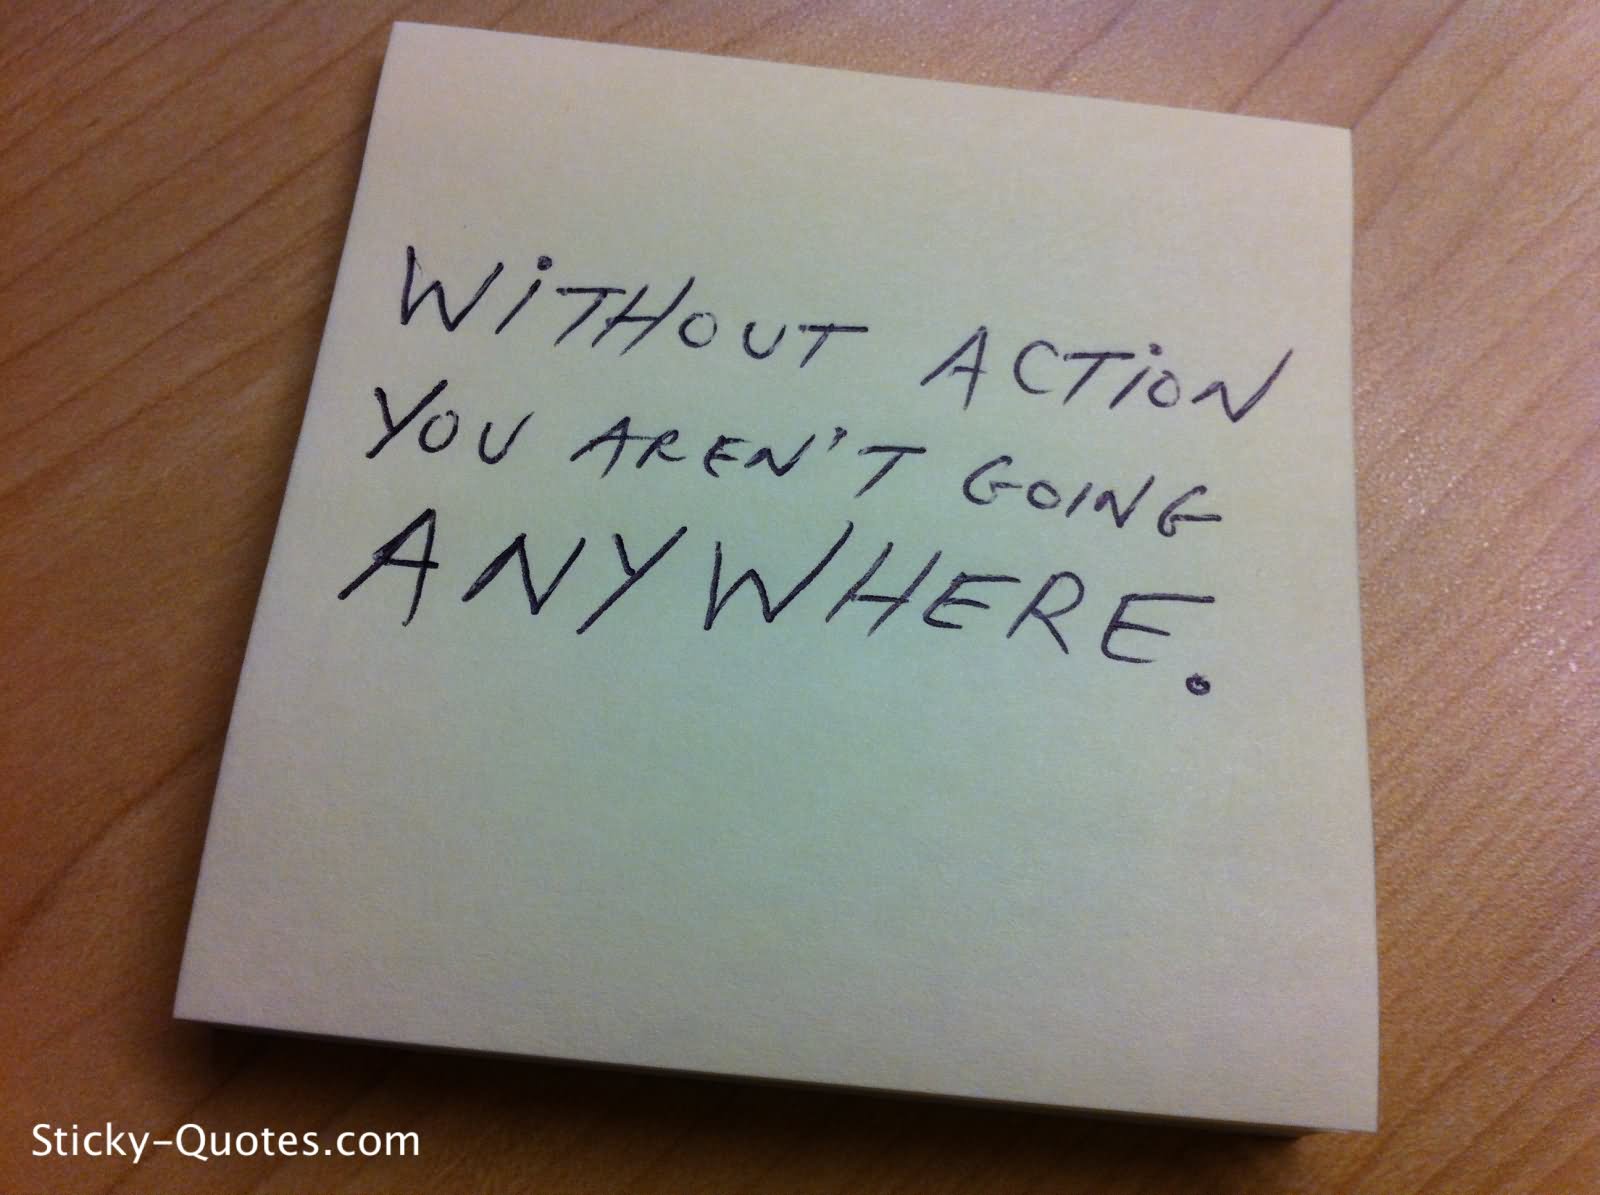 Without action you aren't going anywhere.  - Mahatma Gandhi